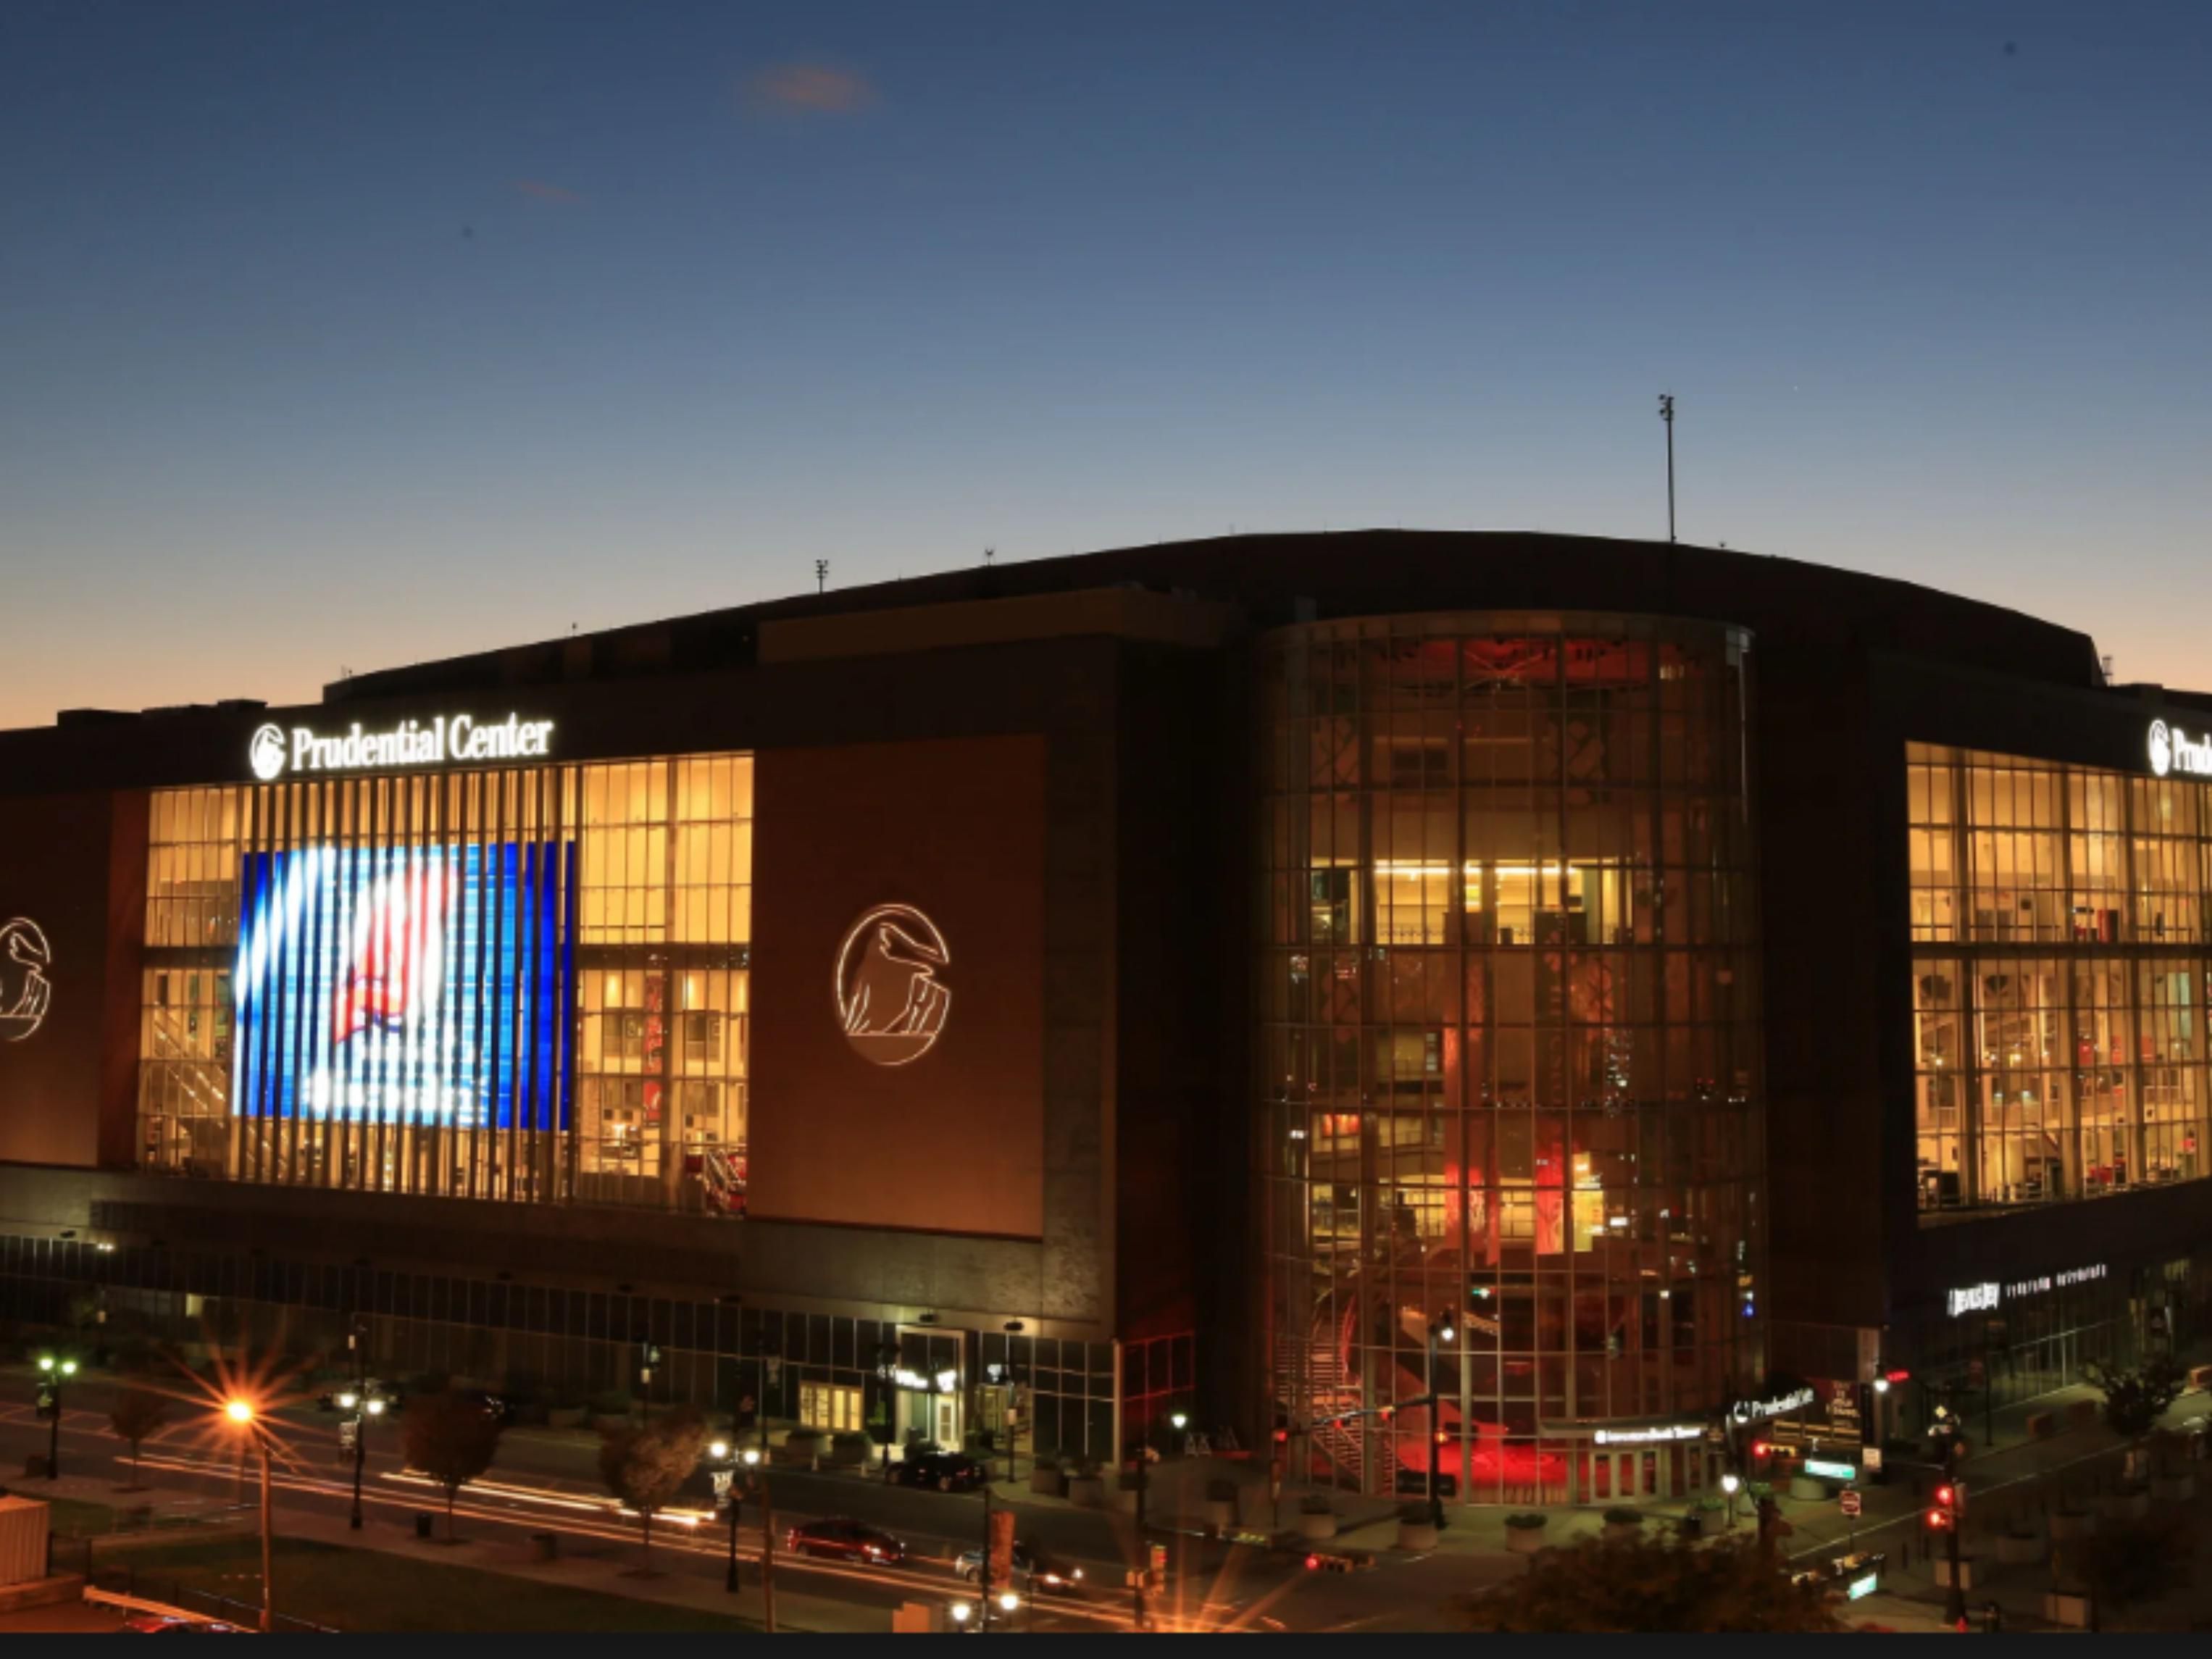 Located just 10 minutes from our Newark airport hotel, the iconic Prudential Center hosts an exciting lineup of events throughout the year, from New Jersey Devils NHL games, to boxing matches, concerts, and the Video Music Awards. Our hotel puts you conveniently close to the action.